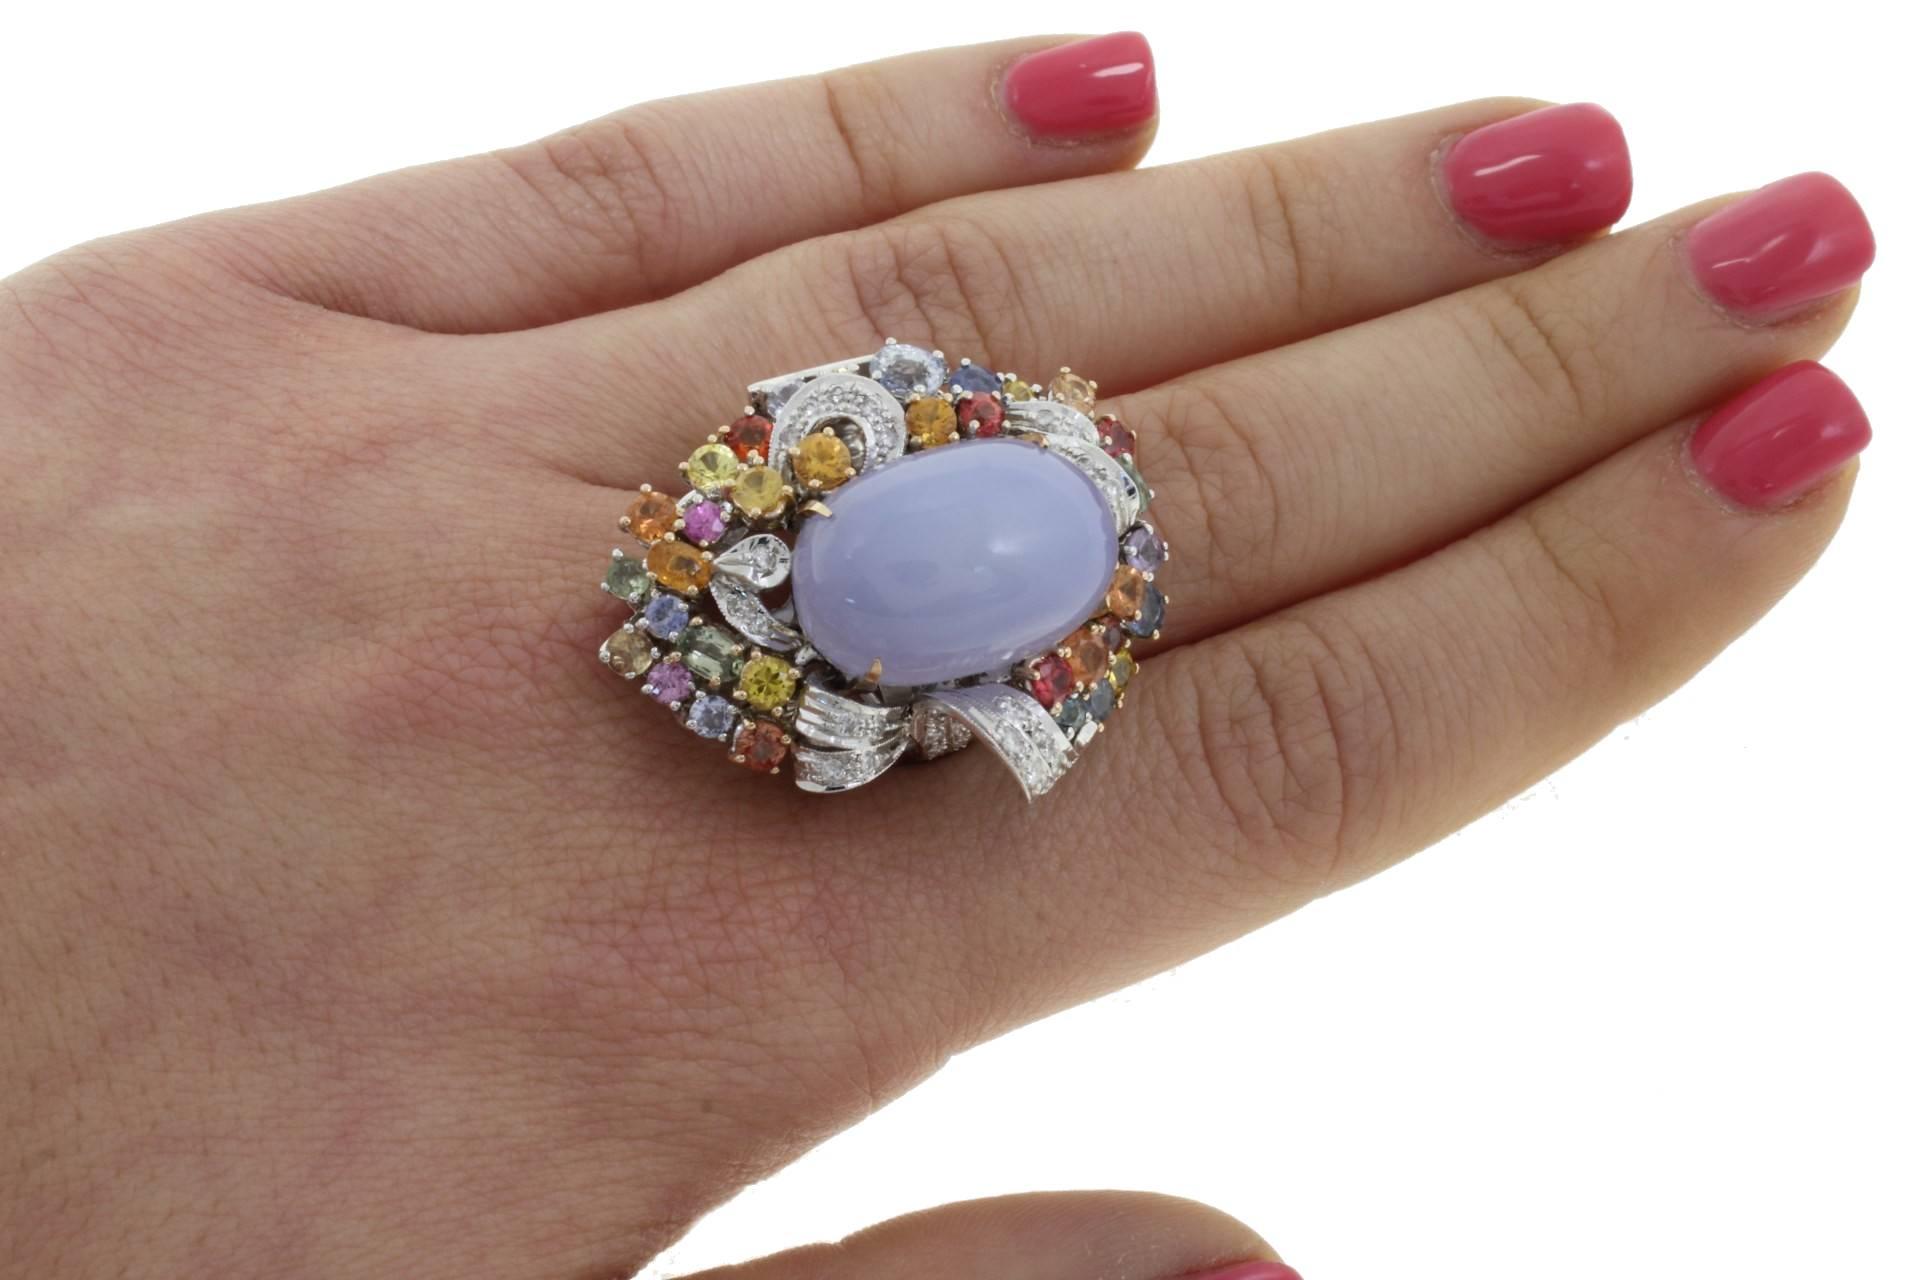 Mixed Cut Diamonds, Multi-Color Sapphires, Chalcedony, 14 Kt White and Rose Gold Ring. For Sale